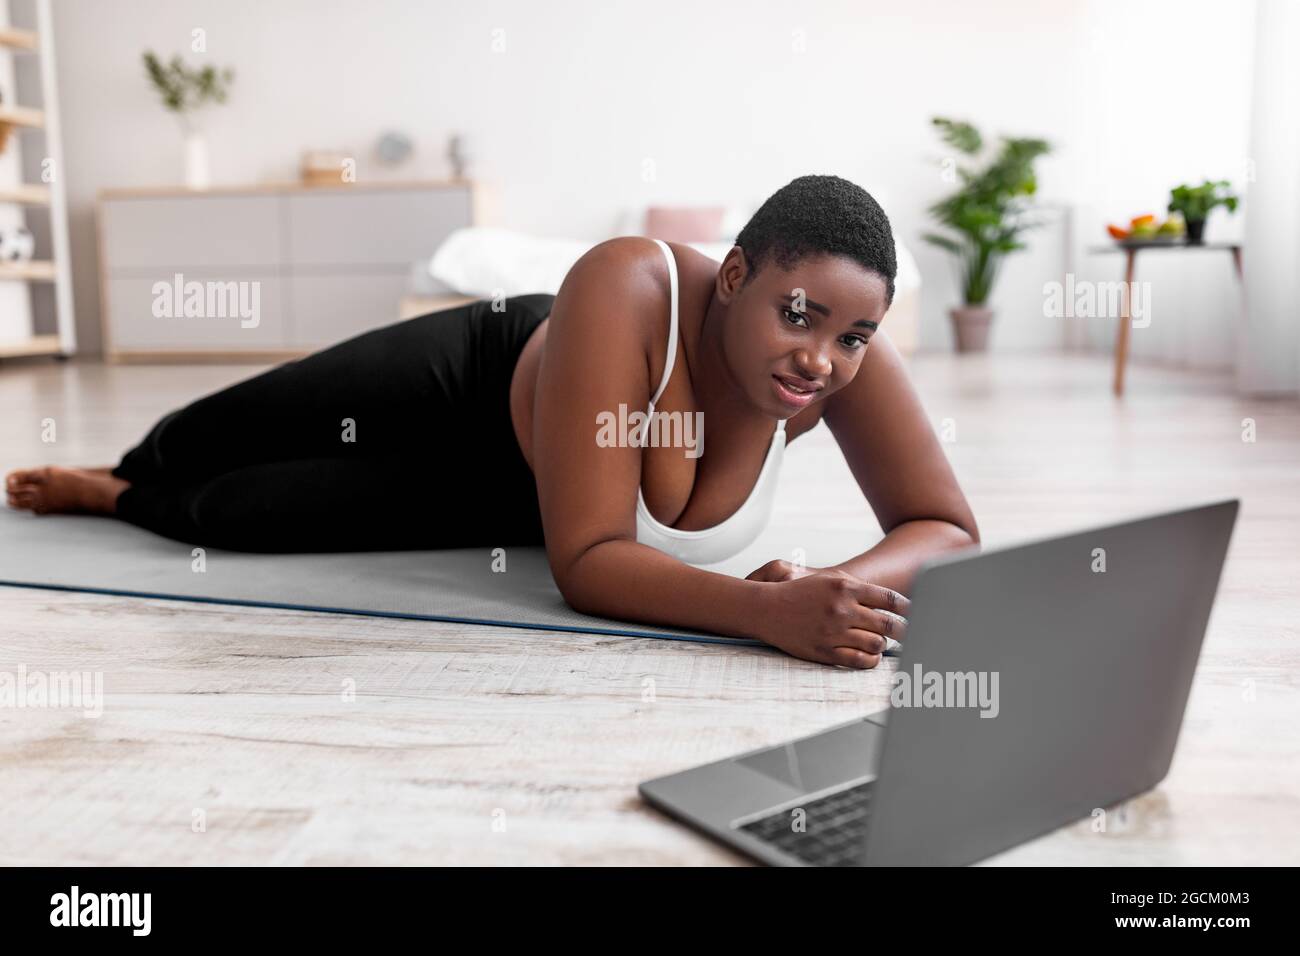 Premium Photo  Tired plus size black woman lying on yoga mat near laptop  wiping forehead after strength training at